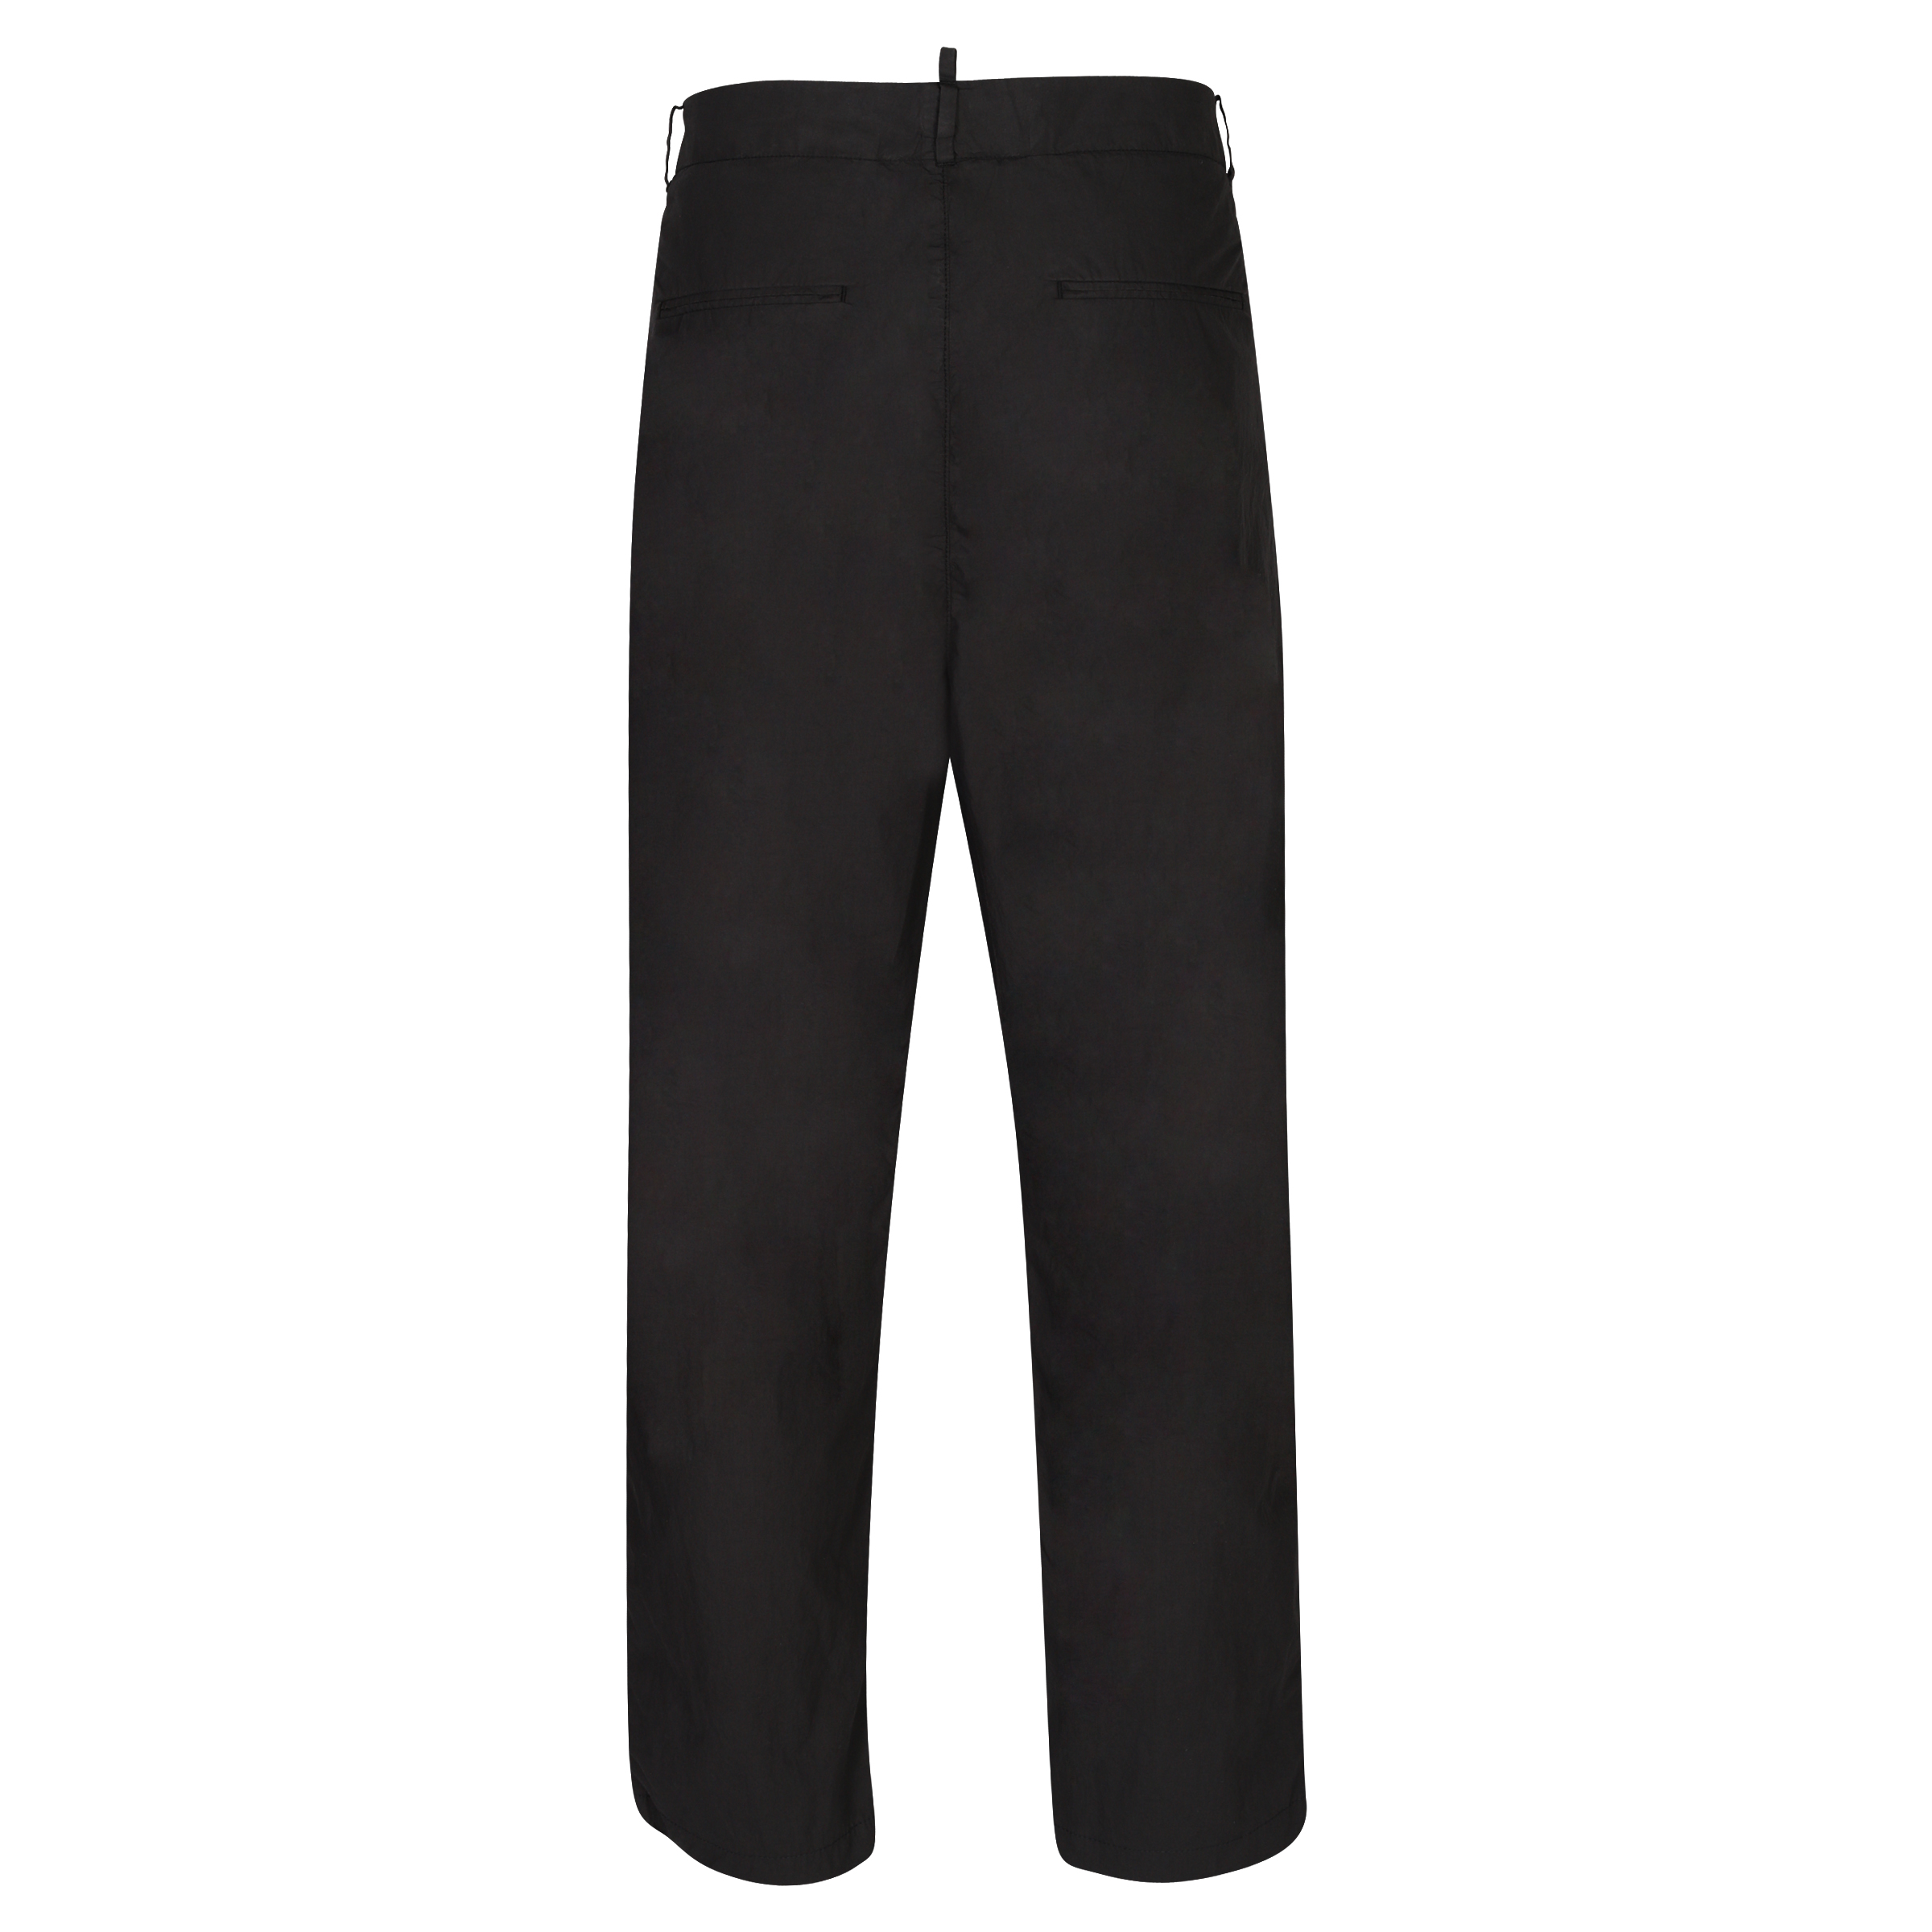 Hannes Roether Trousers in Black